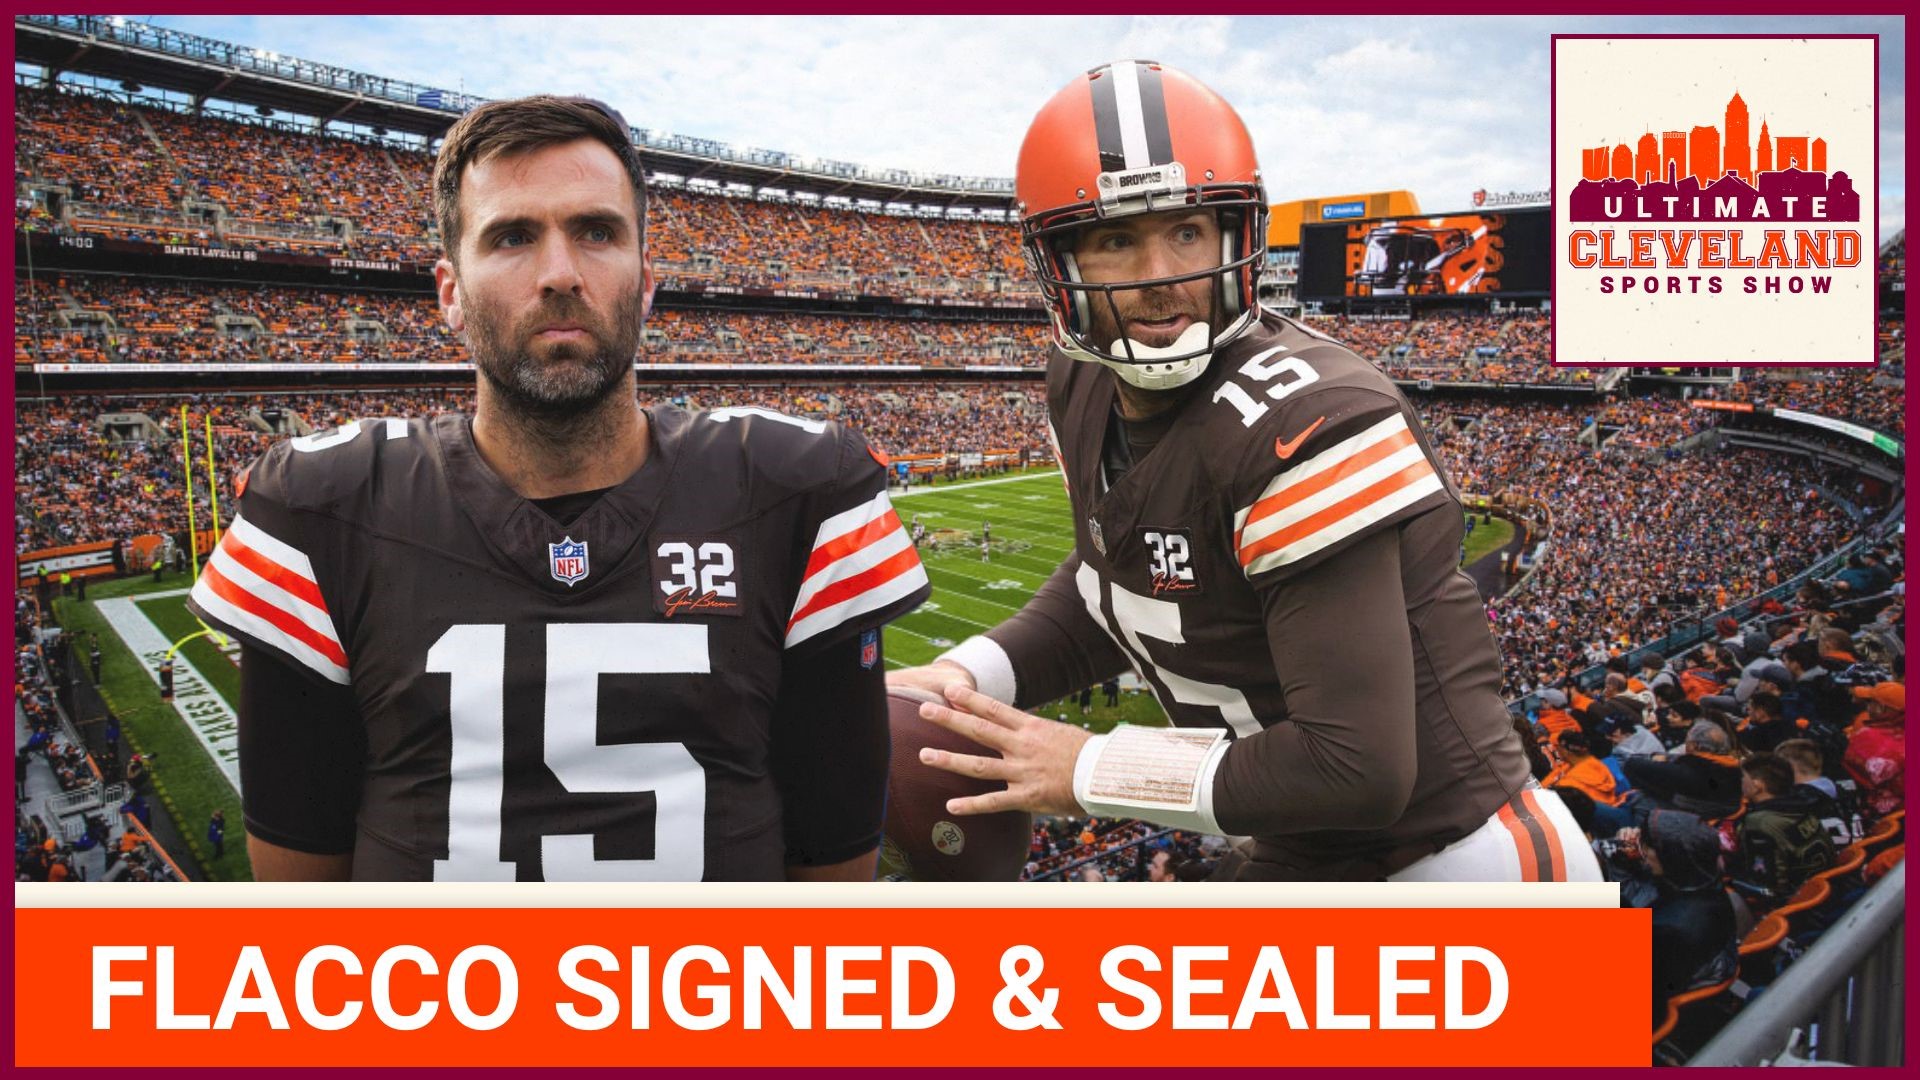 Joe Flacco & Cleveland Browns agree to incentive based, 1year deal